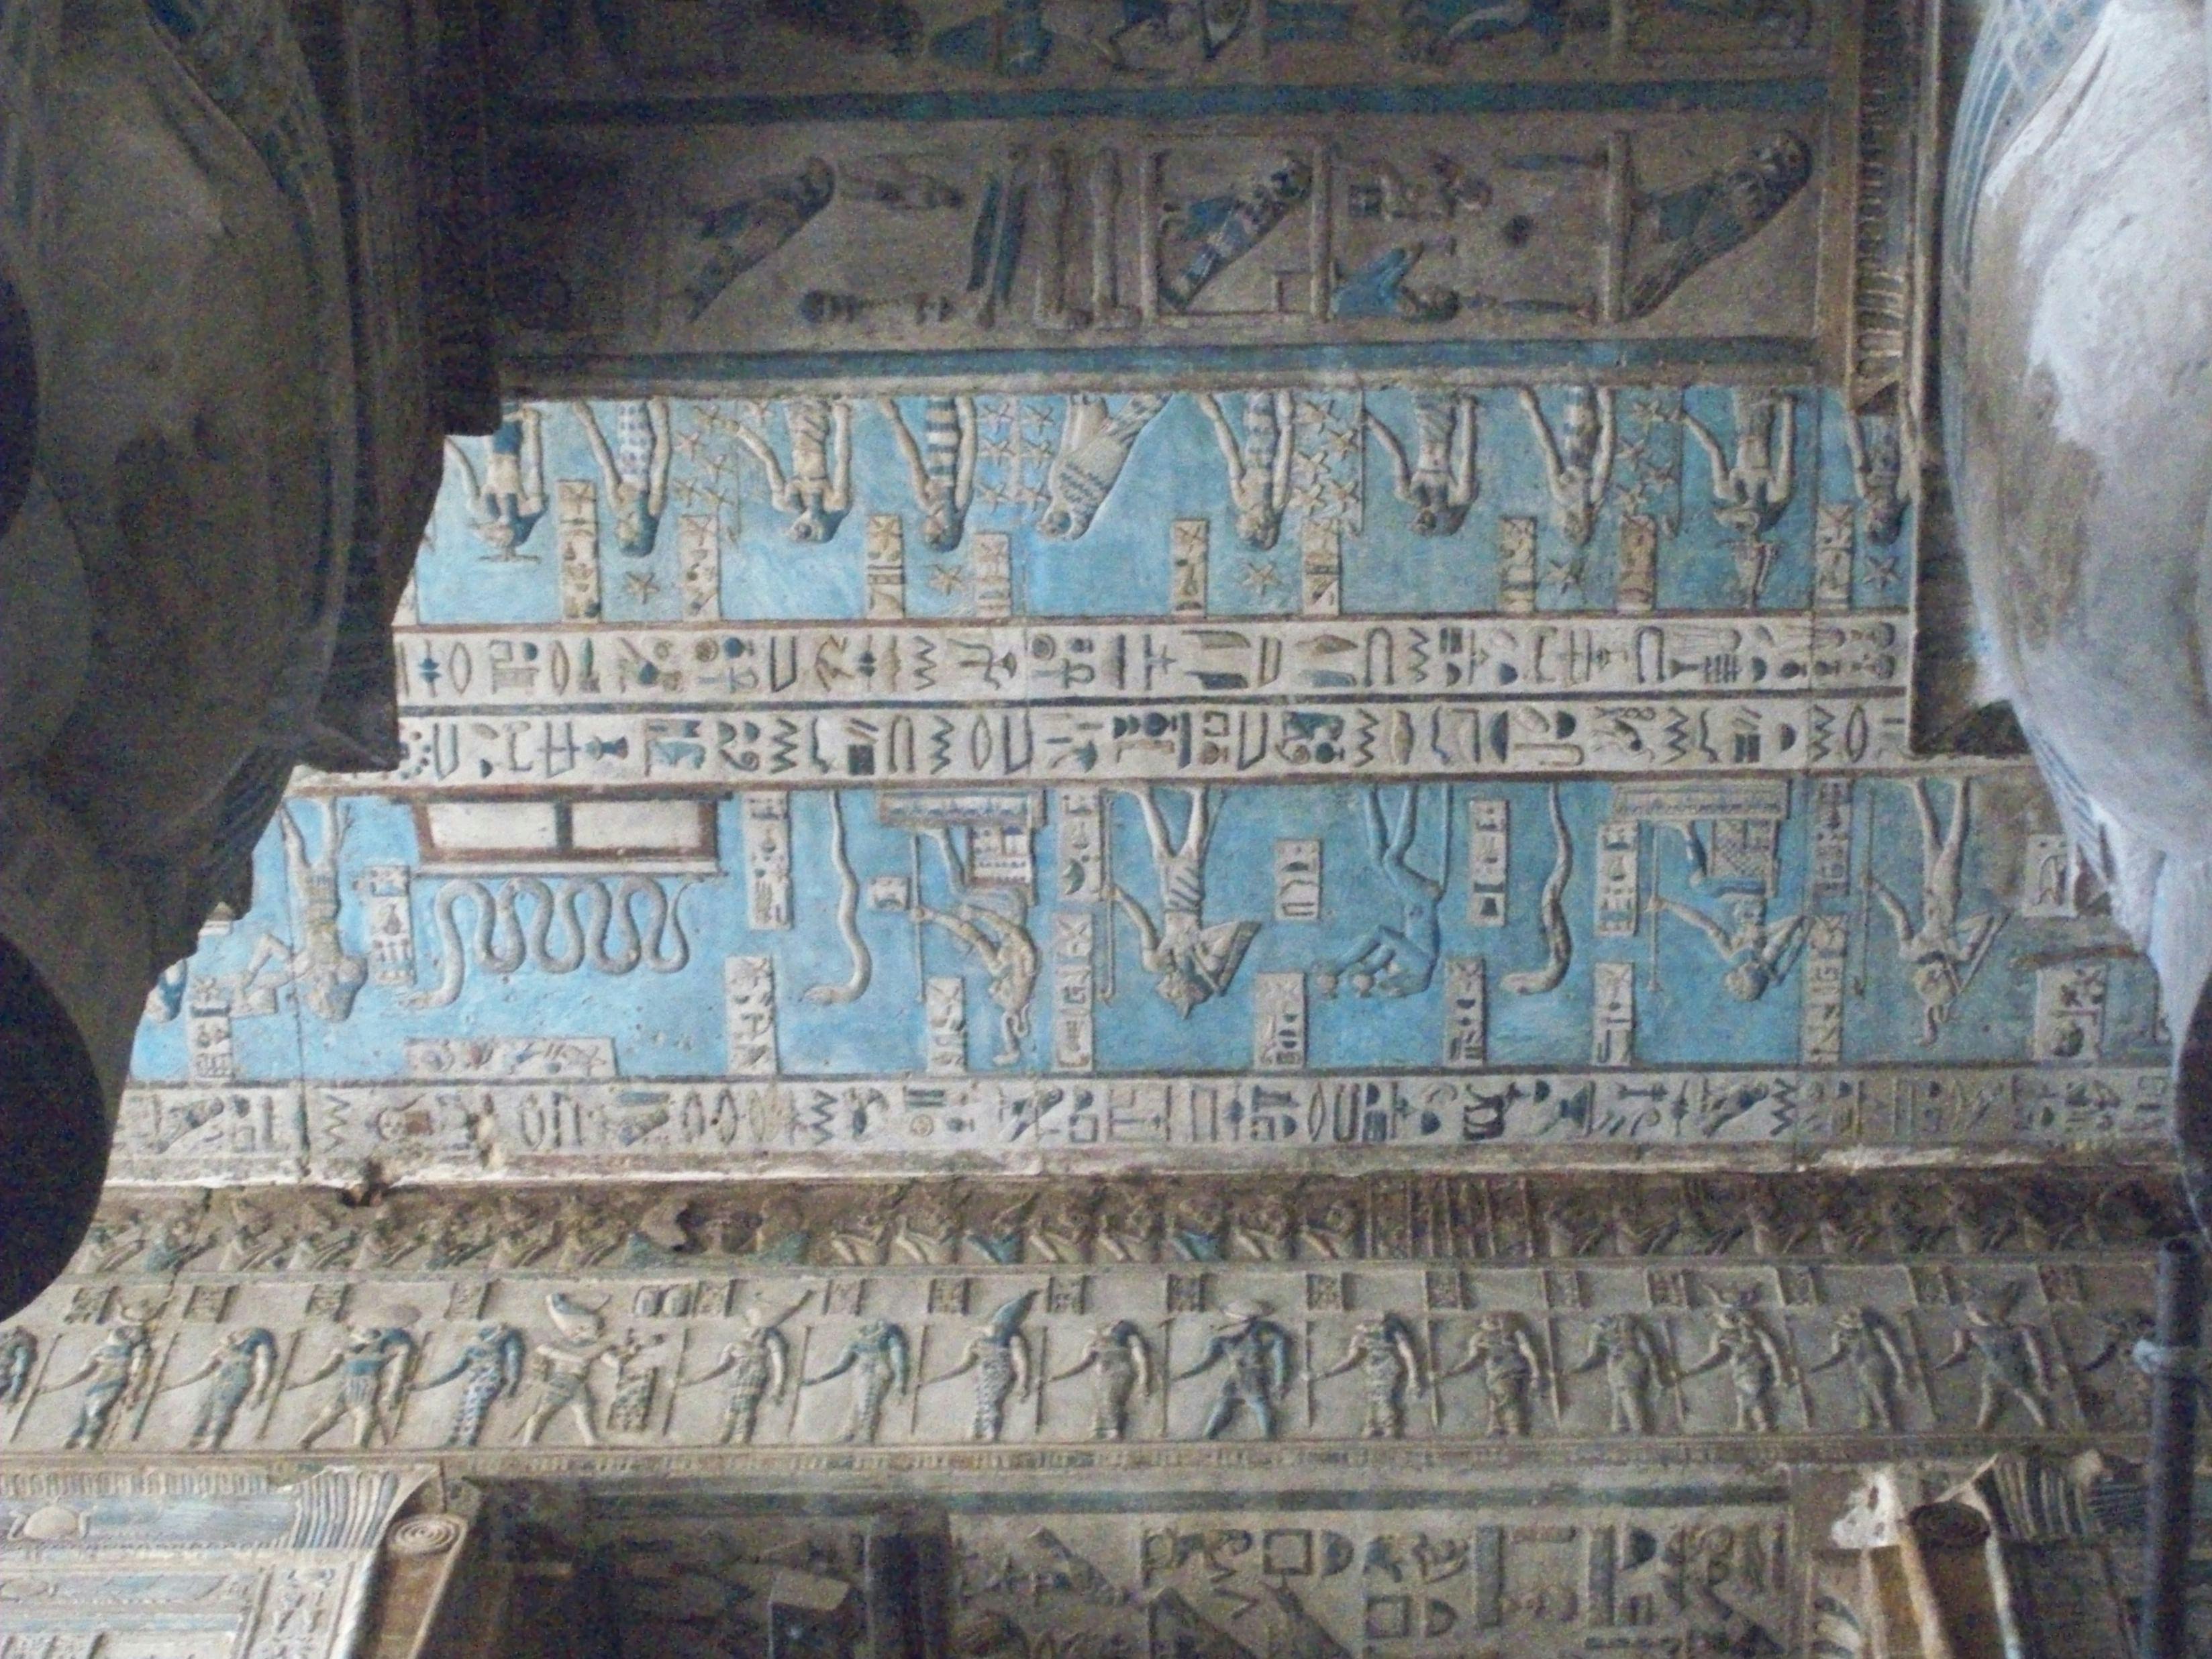 Guided tour to Dendera temple and Nile experience onboard a felucca plus lunch